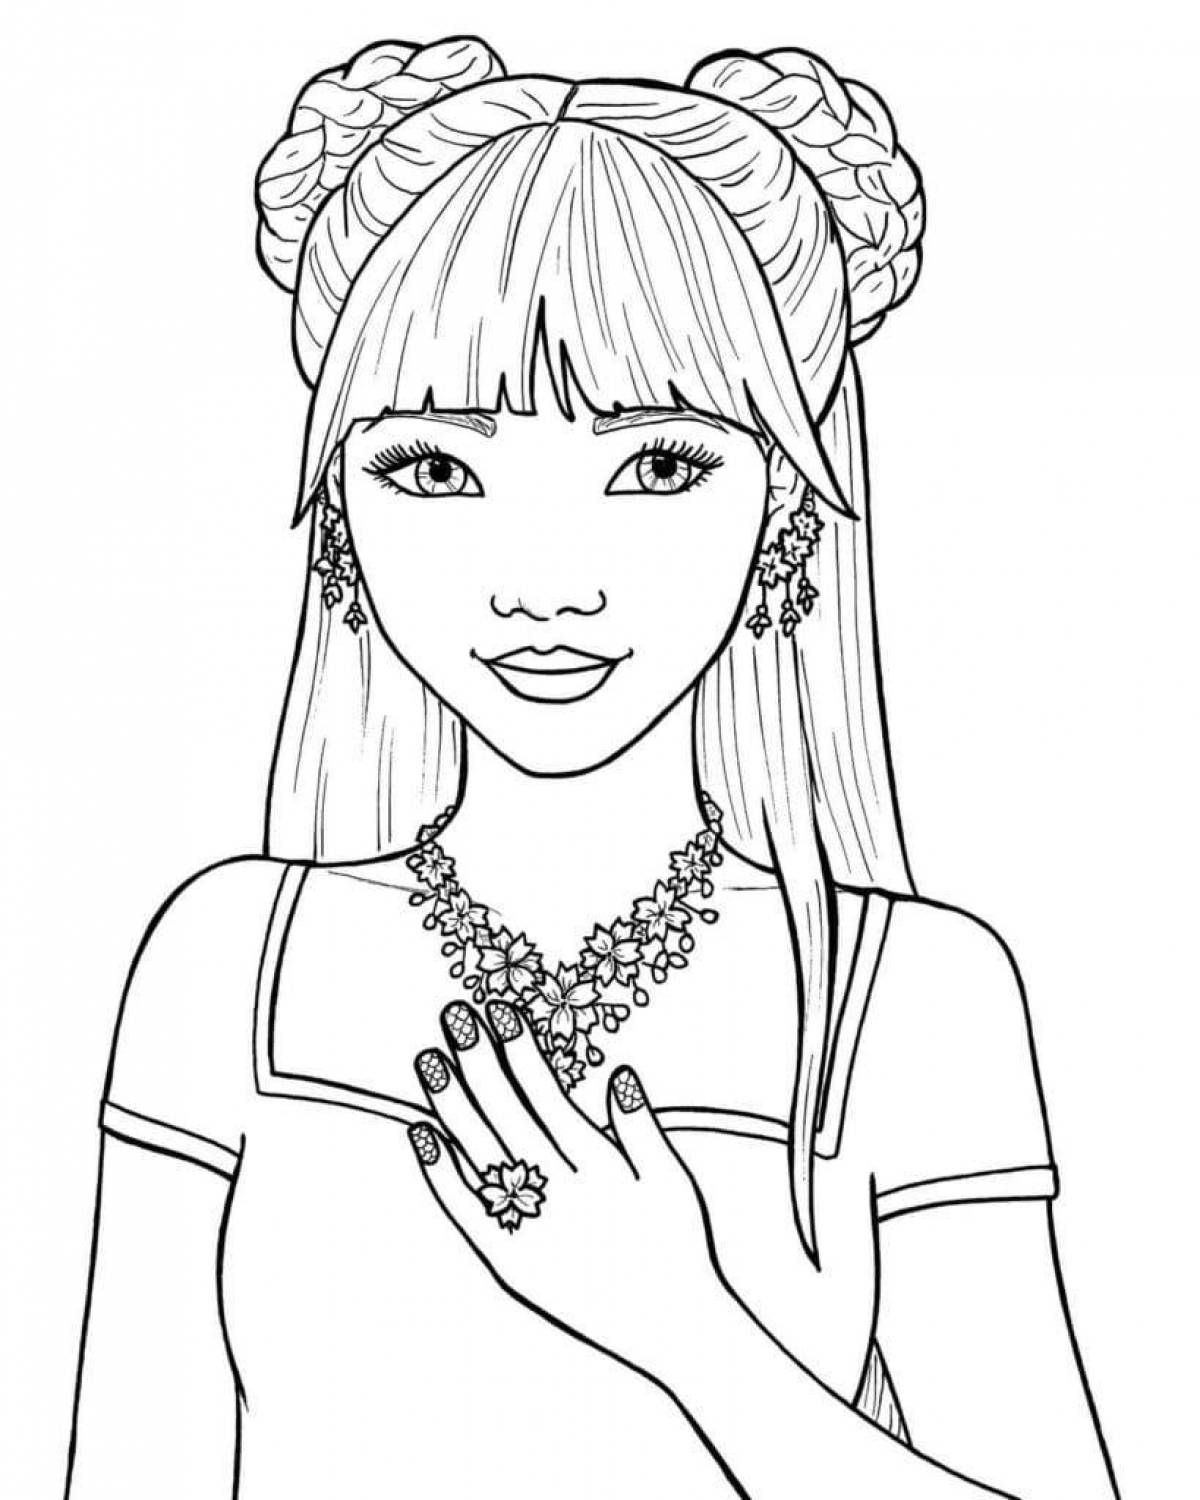 Sparkling coloring pages people girls